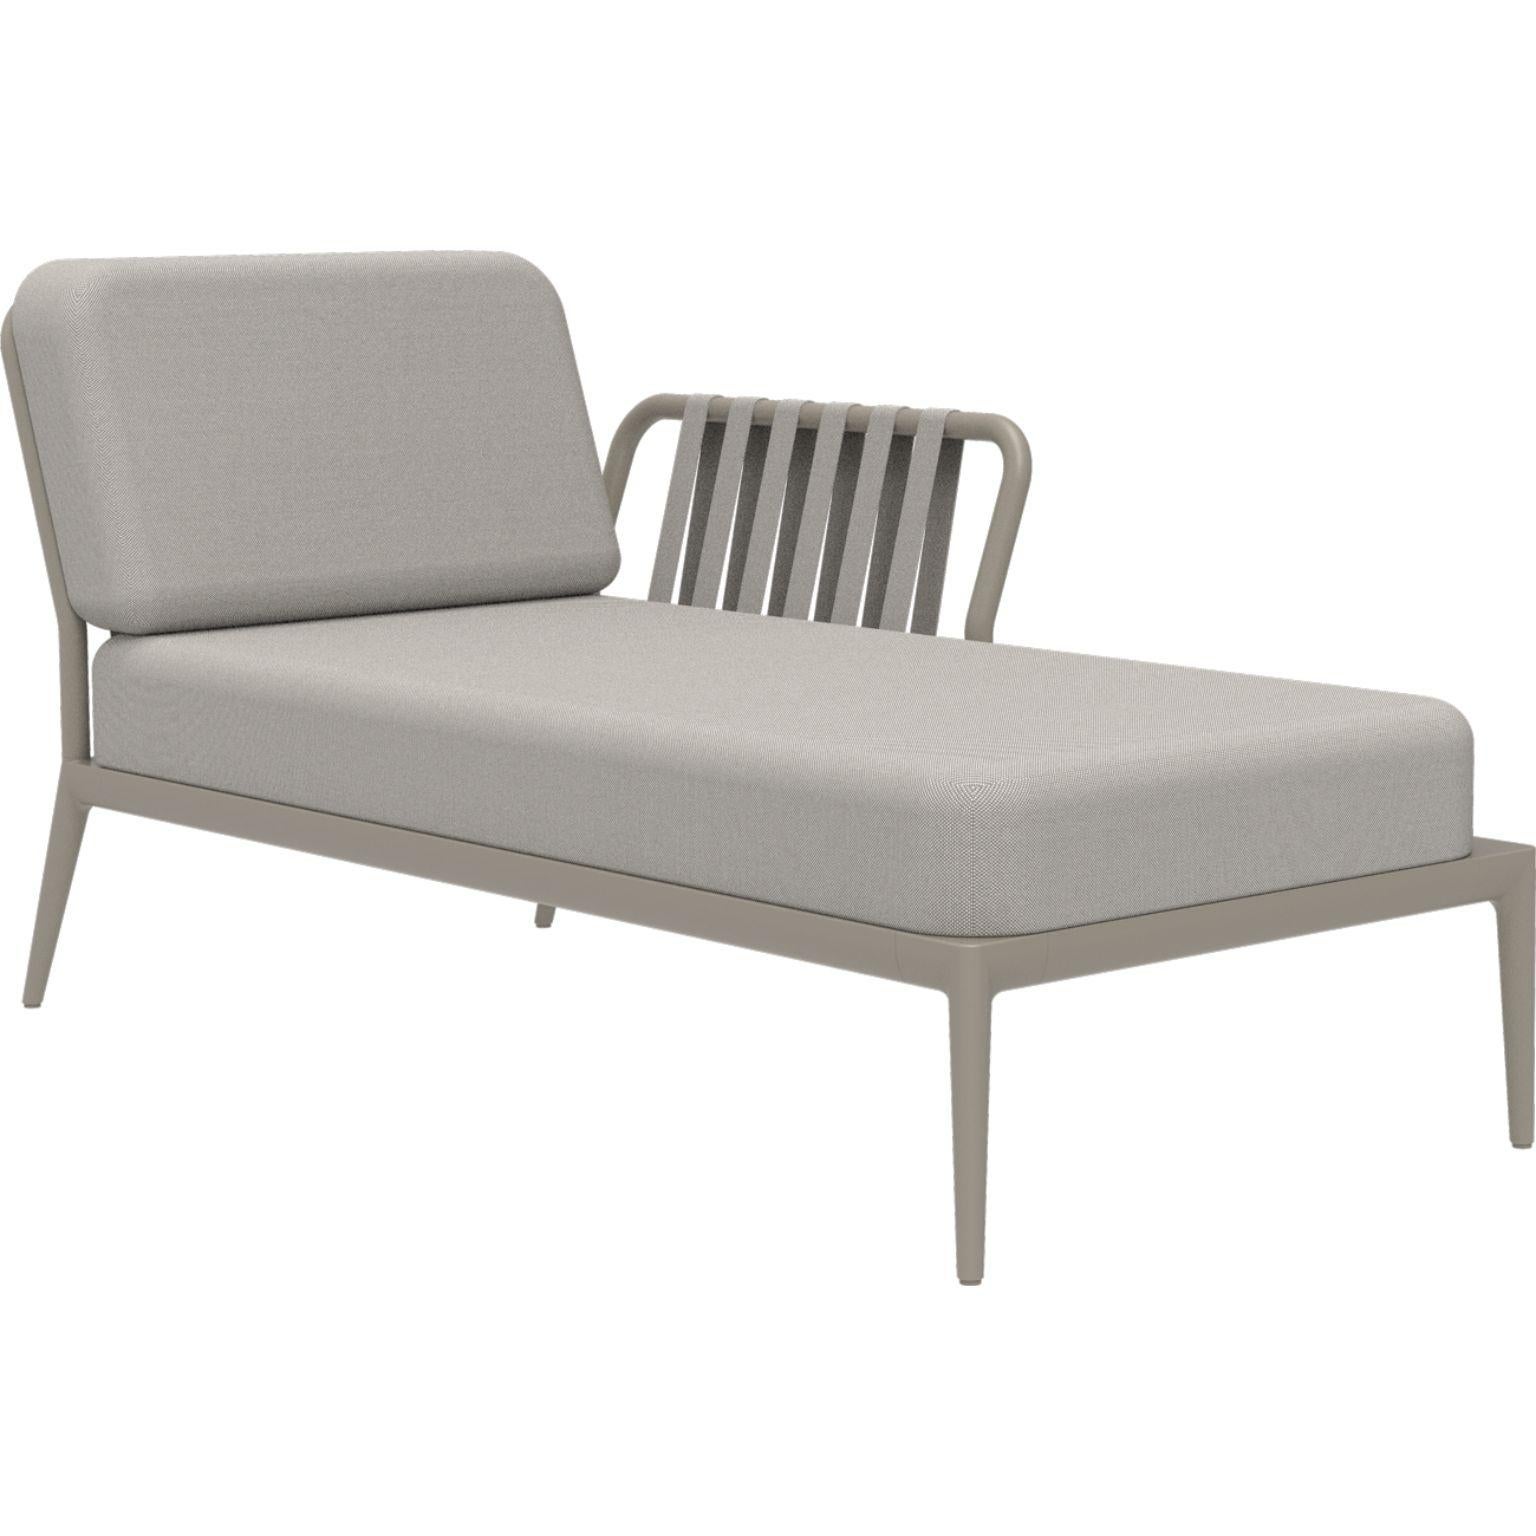 Ribbons cream left chaise longue by MOWEE
Dimensions: D80 x W155 x H81 cm.
Material: Aluminum, upholstery.
Weight: 28 kg
Also Available in different colours and finishes.

An unmistakable collection for its beauty and robustness. A tribute to